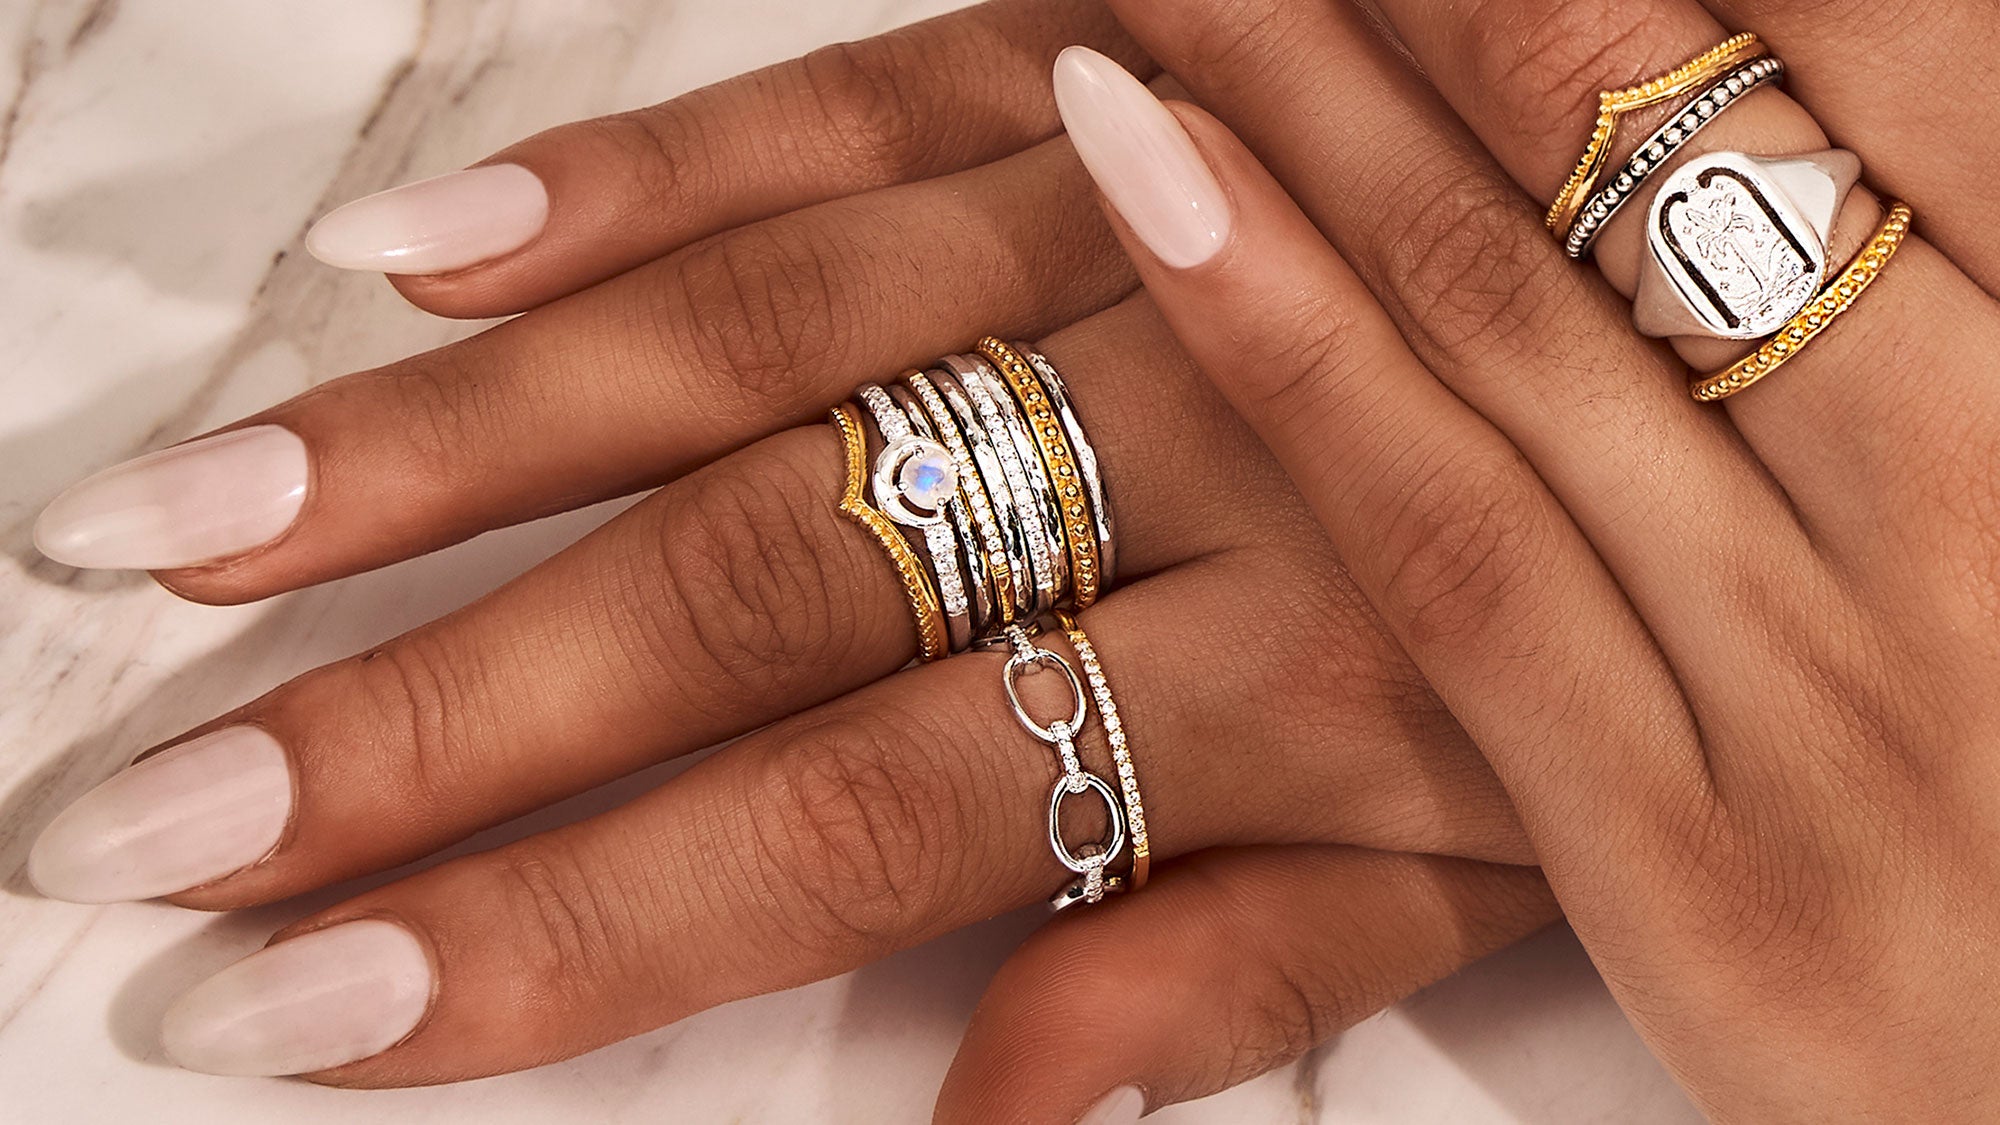 How To Mix Metals: Mixing Silver And Gold Jewelry